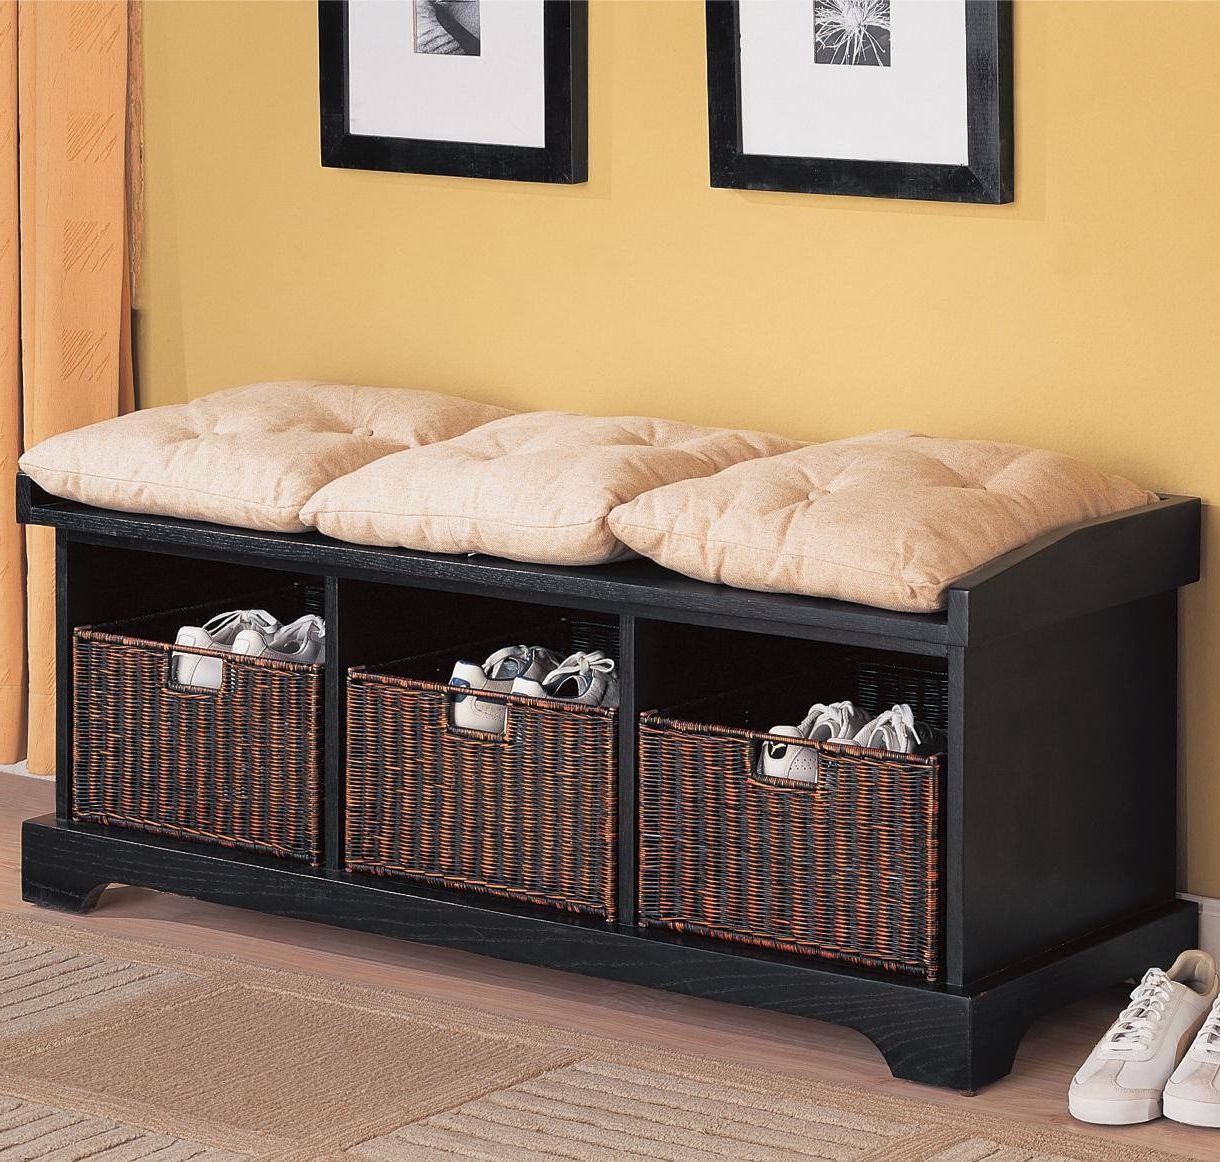 Current Tv Stands With Baskets Regarding Benches Storage Bench With Baskets Lowest Price – Sofa, Sectional (View 20 of 20)